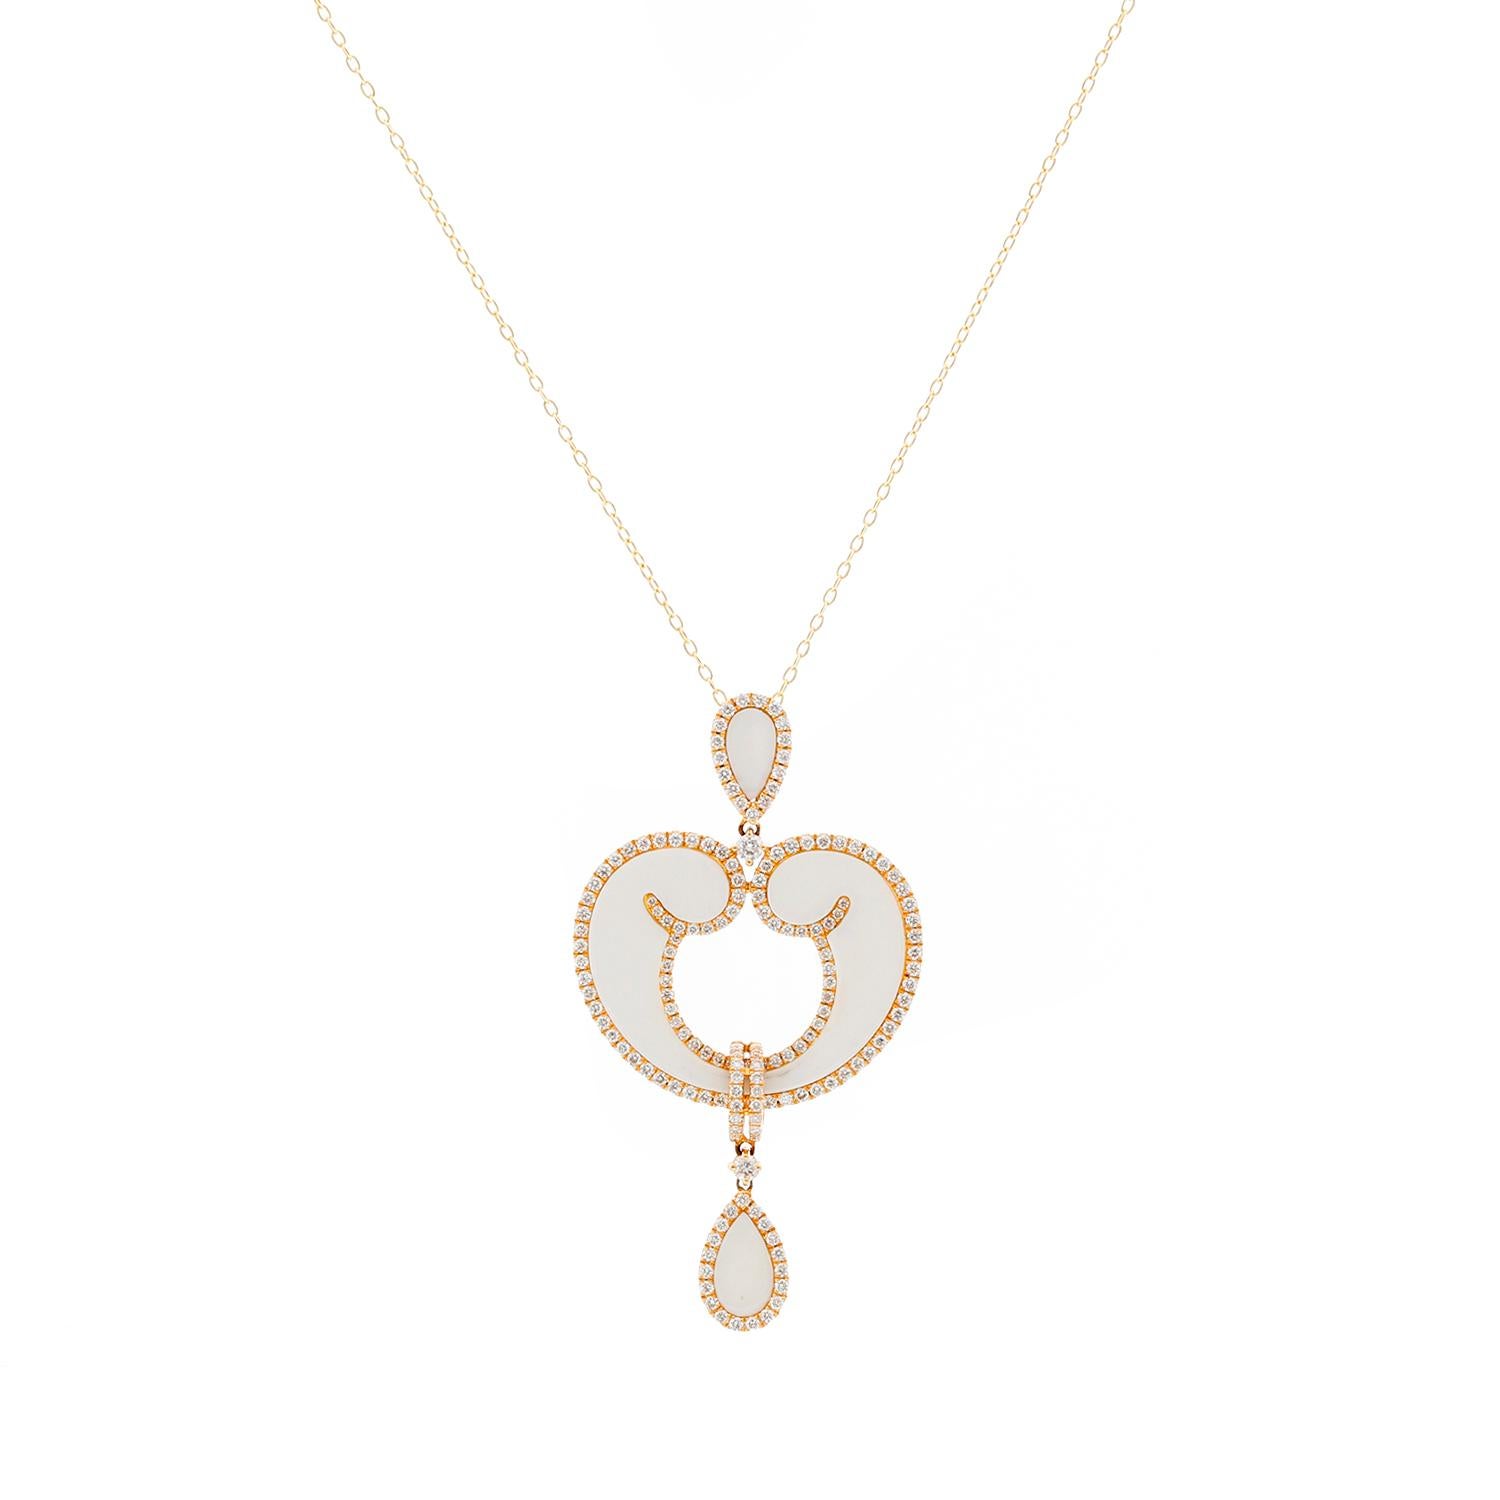 This necklace features 8.74ct white onyx and 1.05ct diamond set in 18k yellow gold.  Pendant measures apx. 2-inches in length on an 18-inch 14k yellow gold chain. Total weight is 8.2 grams. This necklace features a beautiful design and is perfect